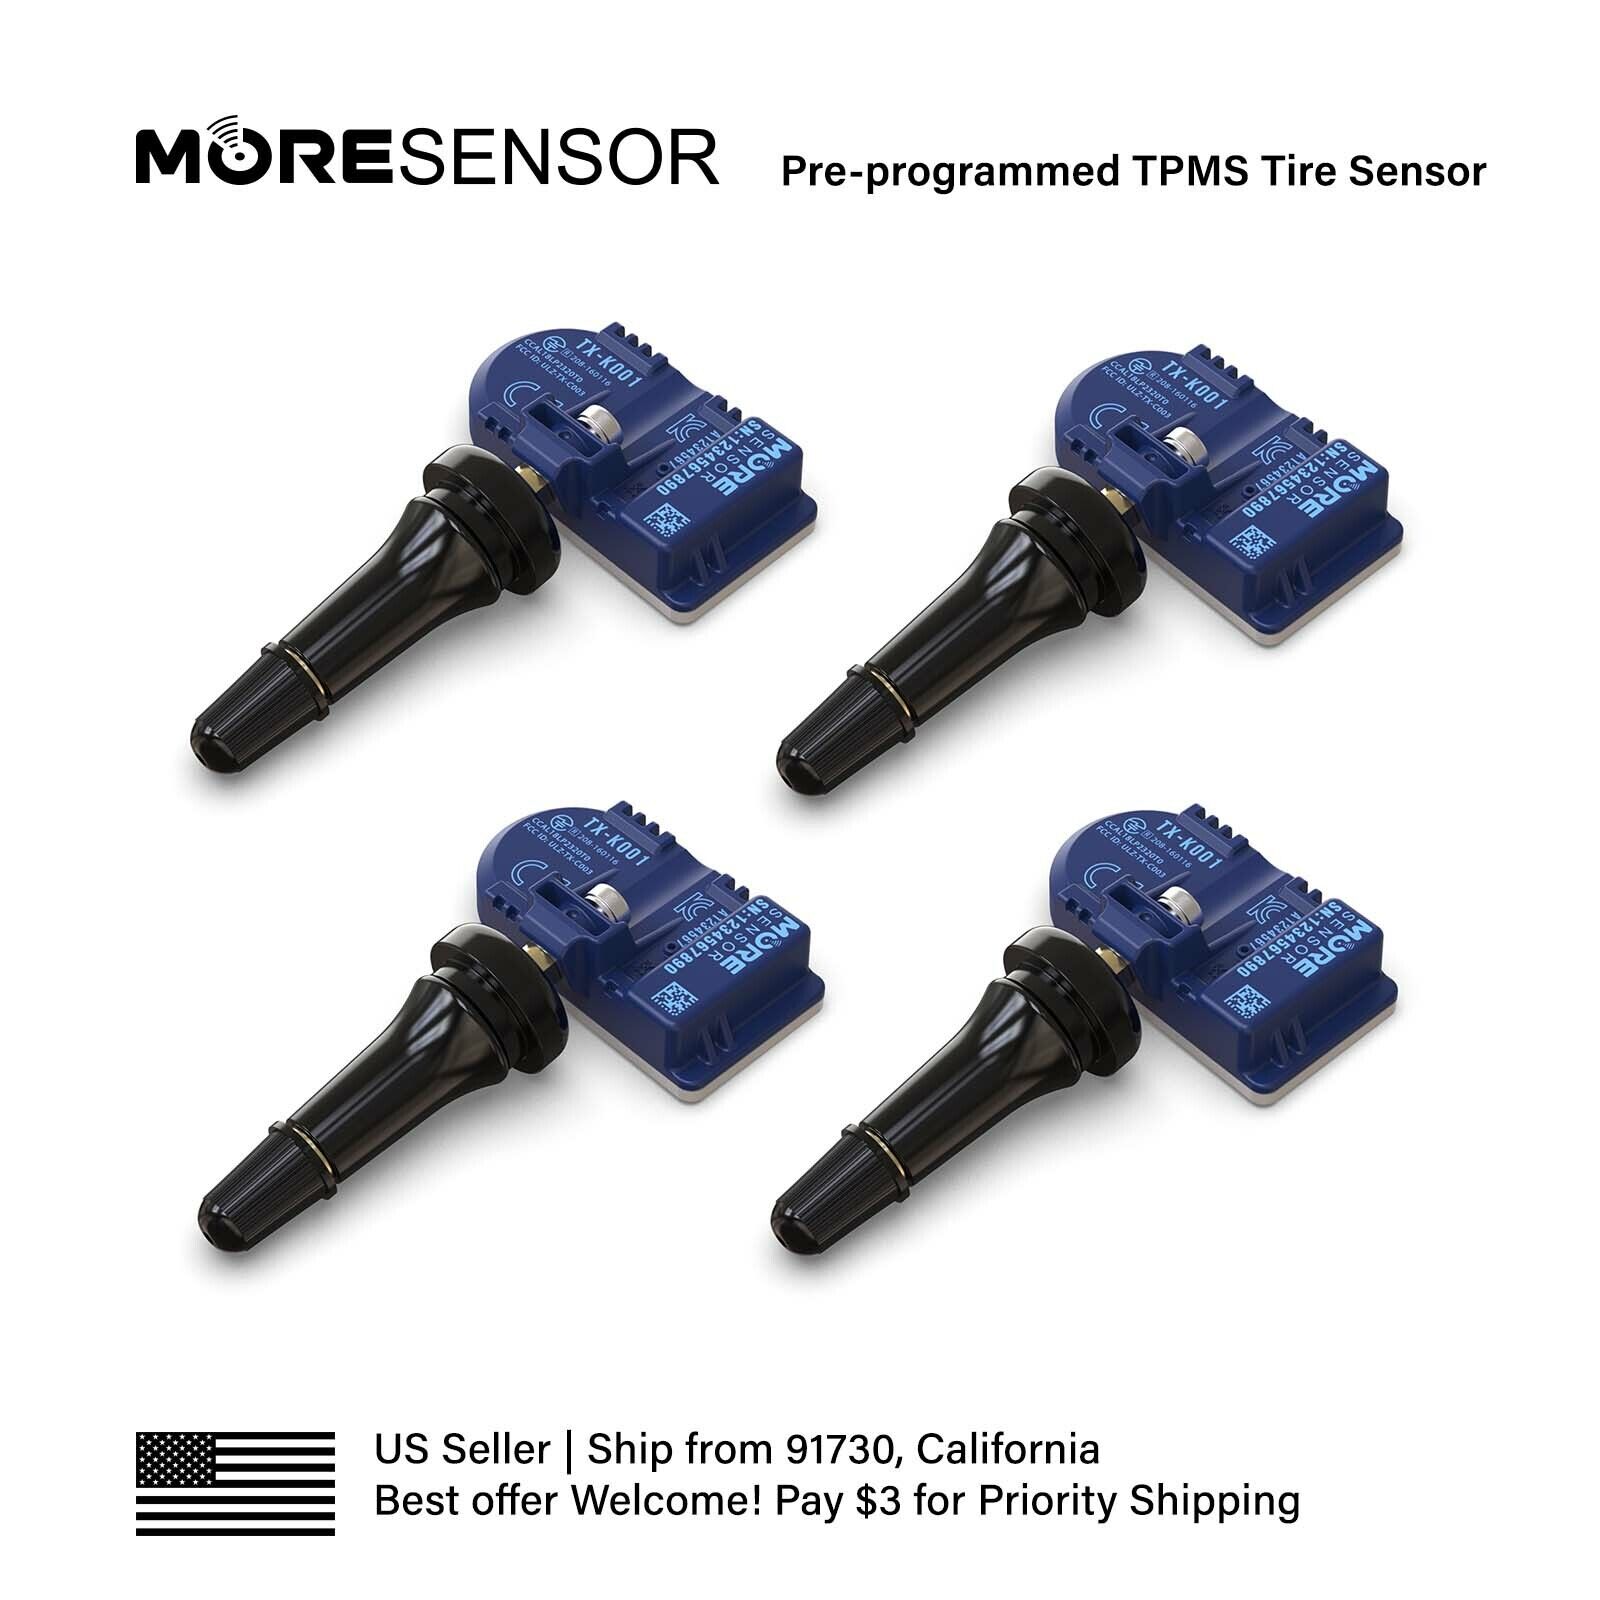 4PC 315MHz MORESENSOR TPMS Snap-in Tire Sensor for Mazda BDGF37140 Replacement